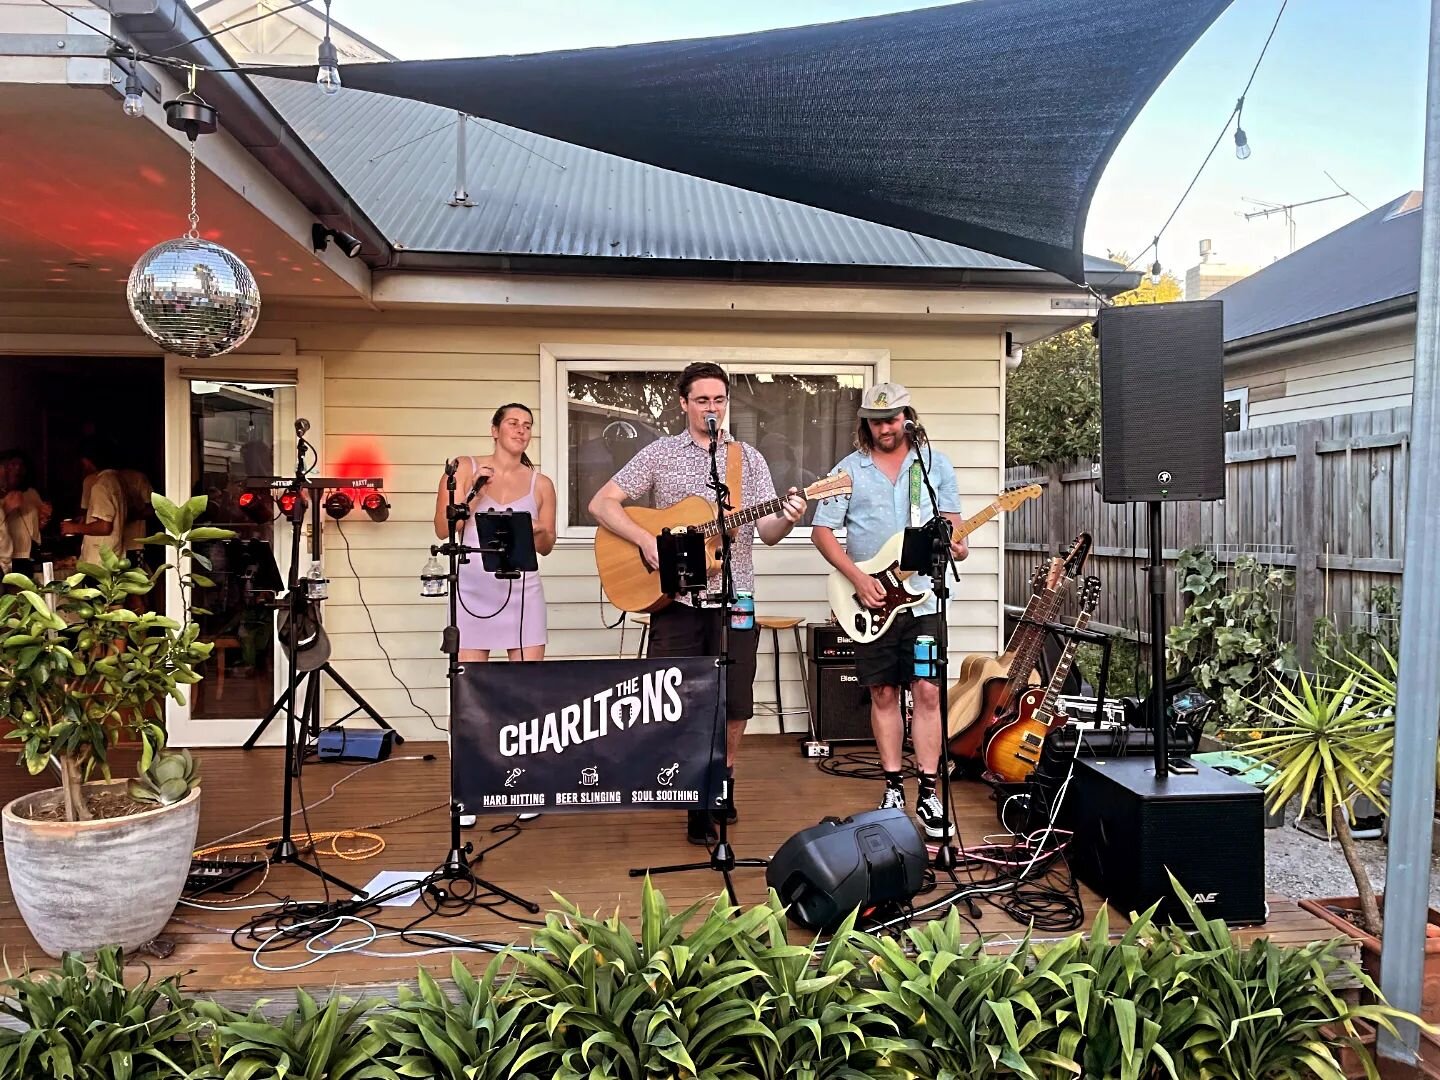 Kane's 21st last night absolutely rocked! 🤘

Playing at private functions like this are our bread and butter! Hot night, cold drinks, topped off with all your favorite songs! 

If you've got a birthday coming up and looking for live music send us a 